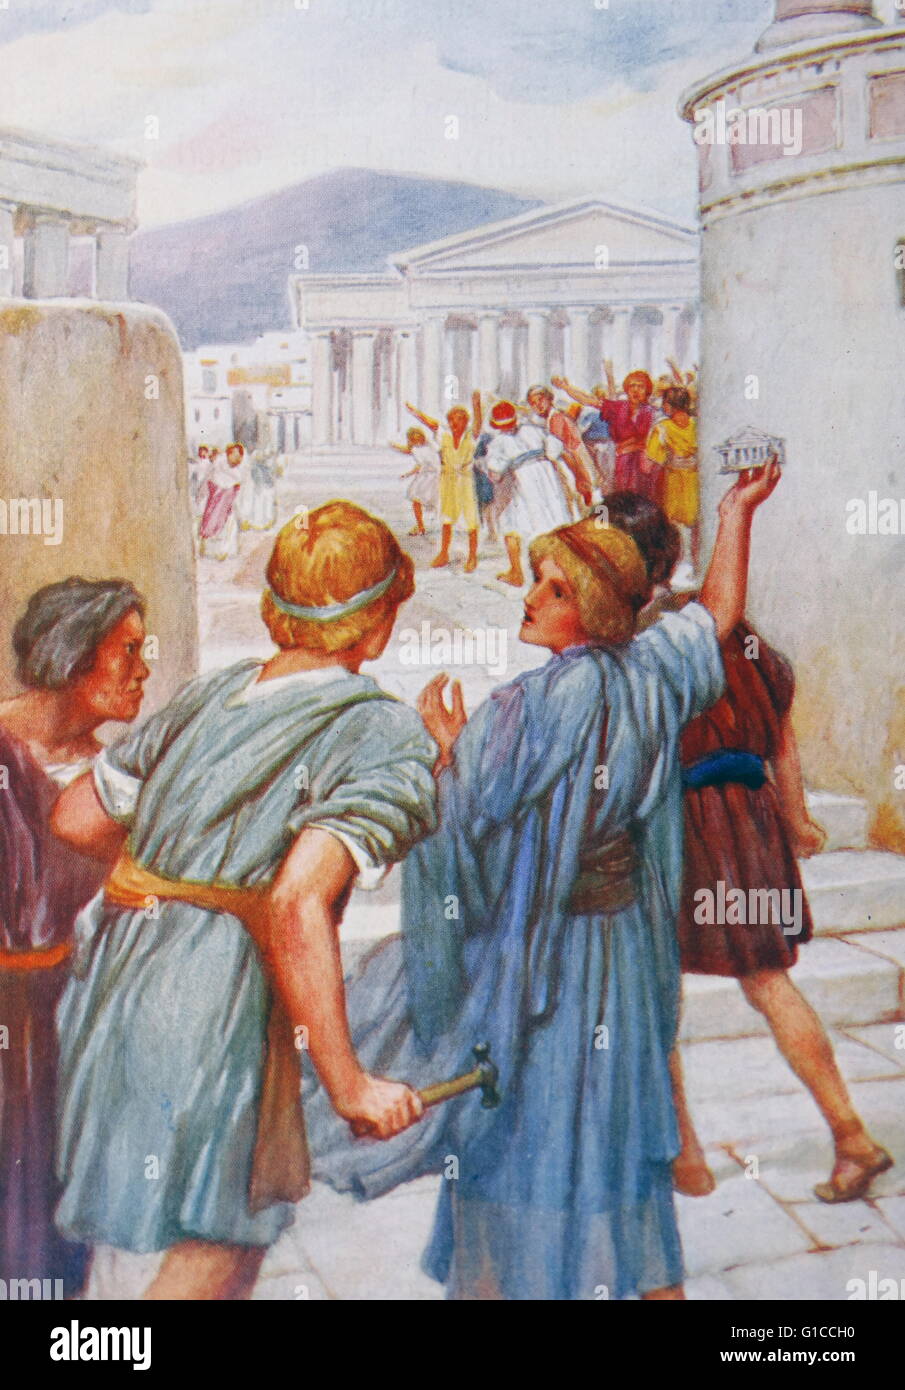 The Riot at Ephesus. Illustration by Arthur A. Dixon 1872-1959. From the Precious Gift: Bible Stories for Children by T W Wilson (1910) Stock Photo